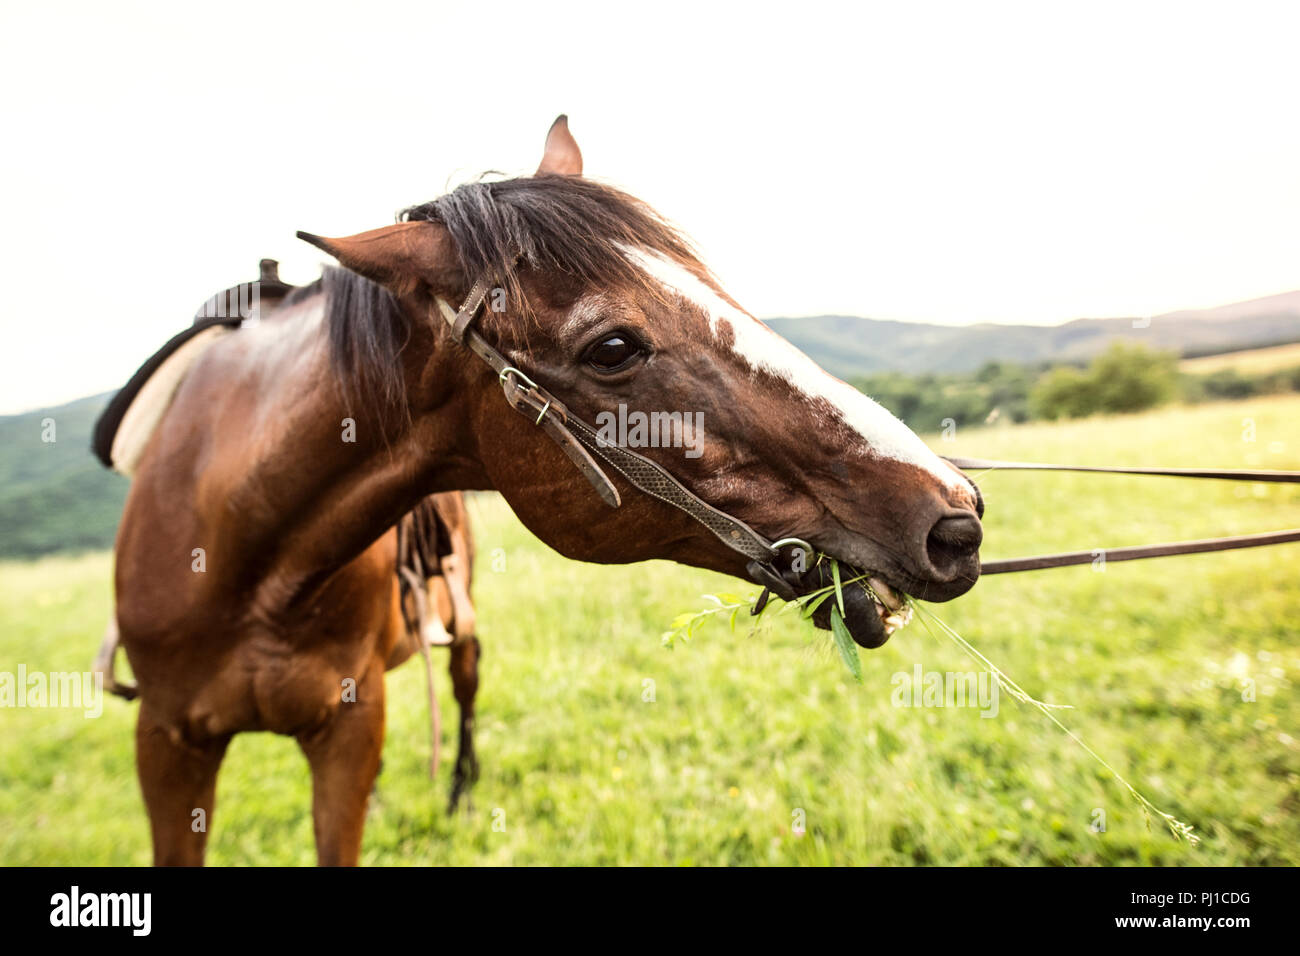 A brown riding horse eating grass, being held by somebody. Stock Photo